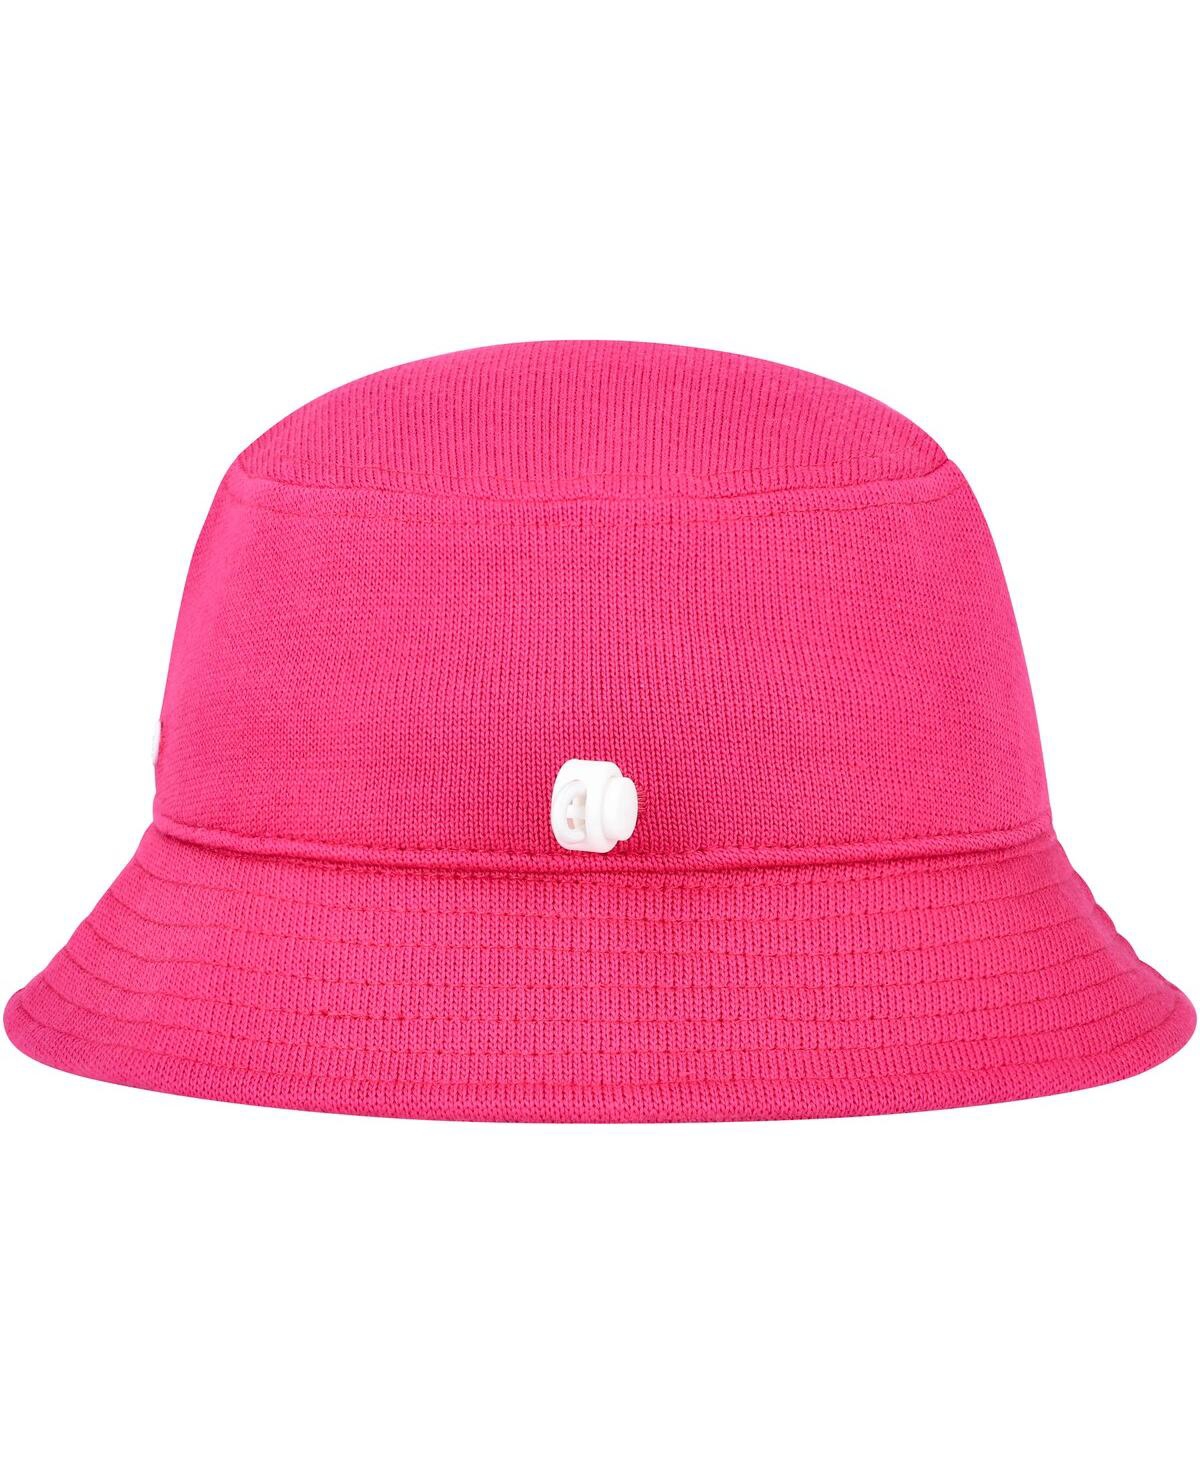 Shop Love Your Melon Girls Youth Pink Barbie Hero Booney Hat